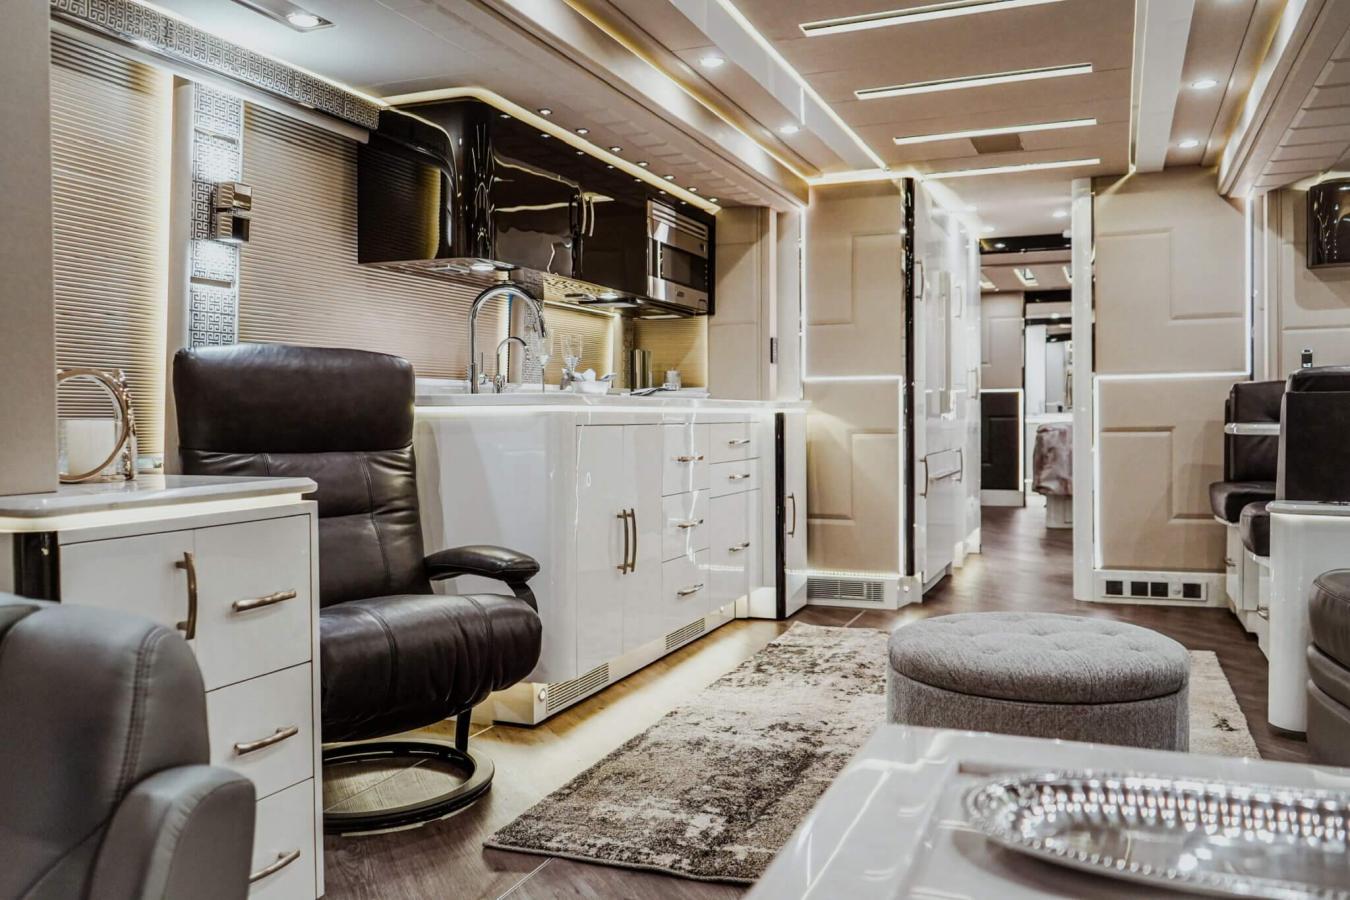 An interior shot of an Emerald Luxury Coach RV with white cabinets